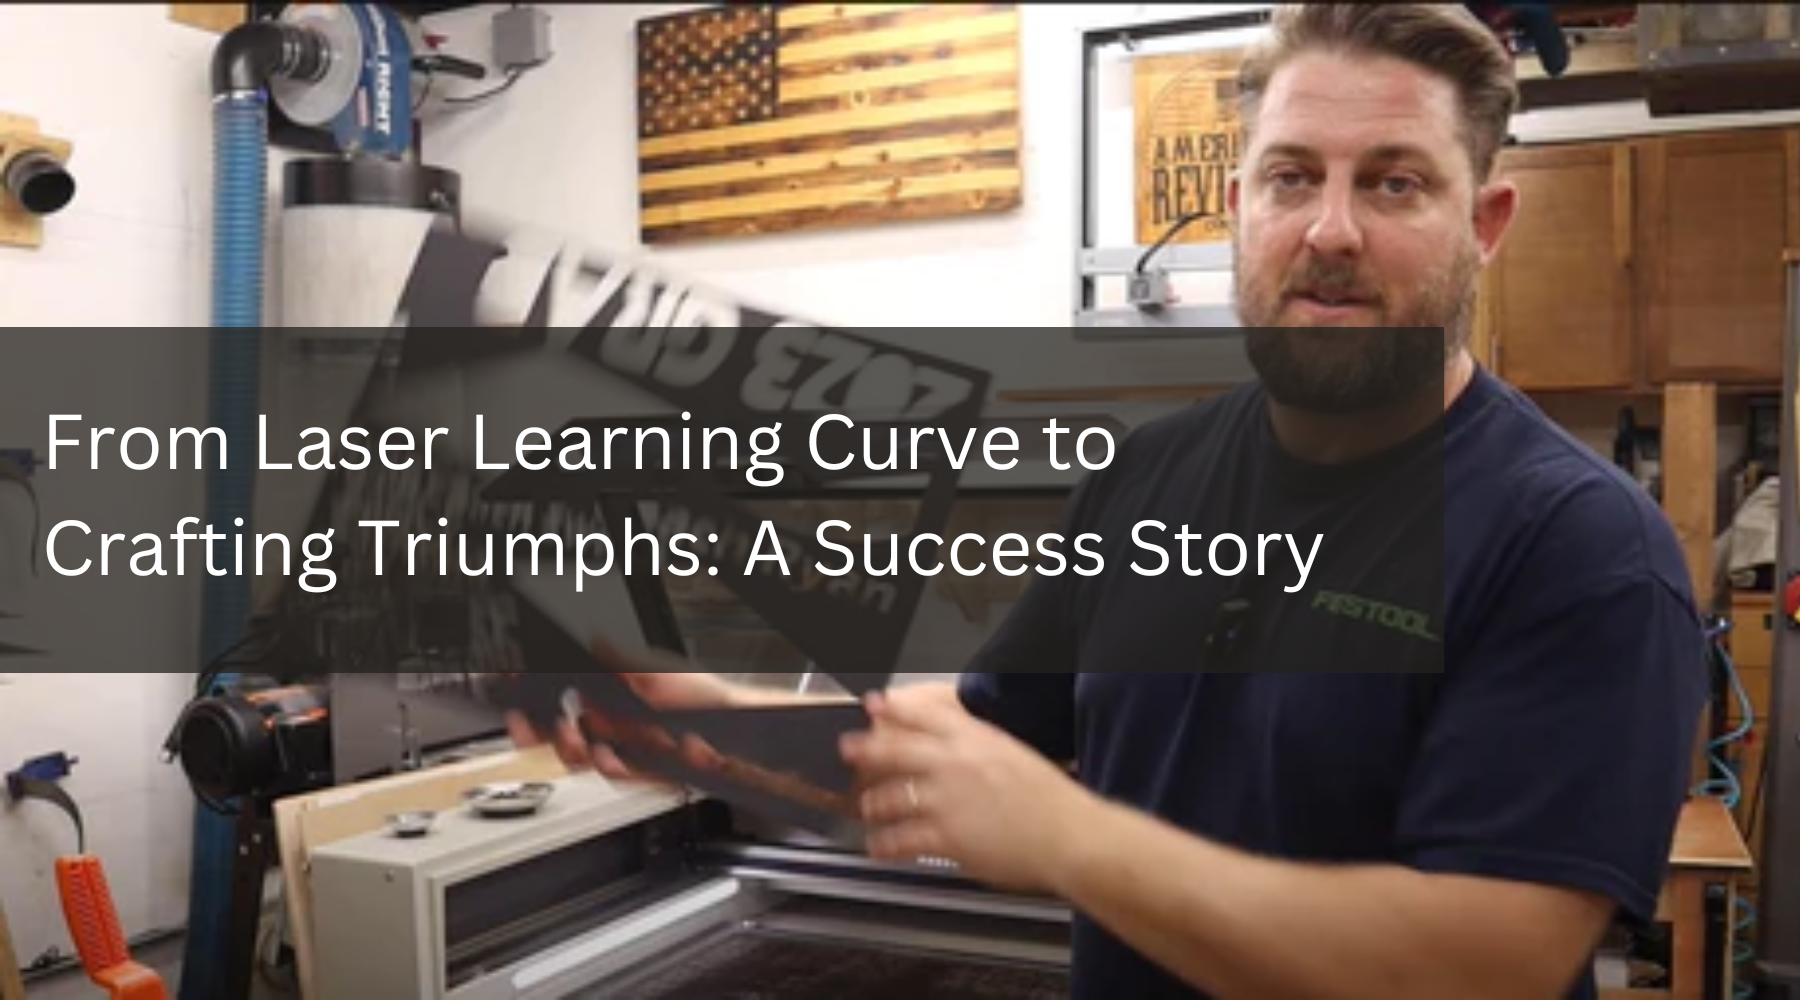 From Laser Learning Curve to Crafting Triumphs: A Success Story